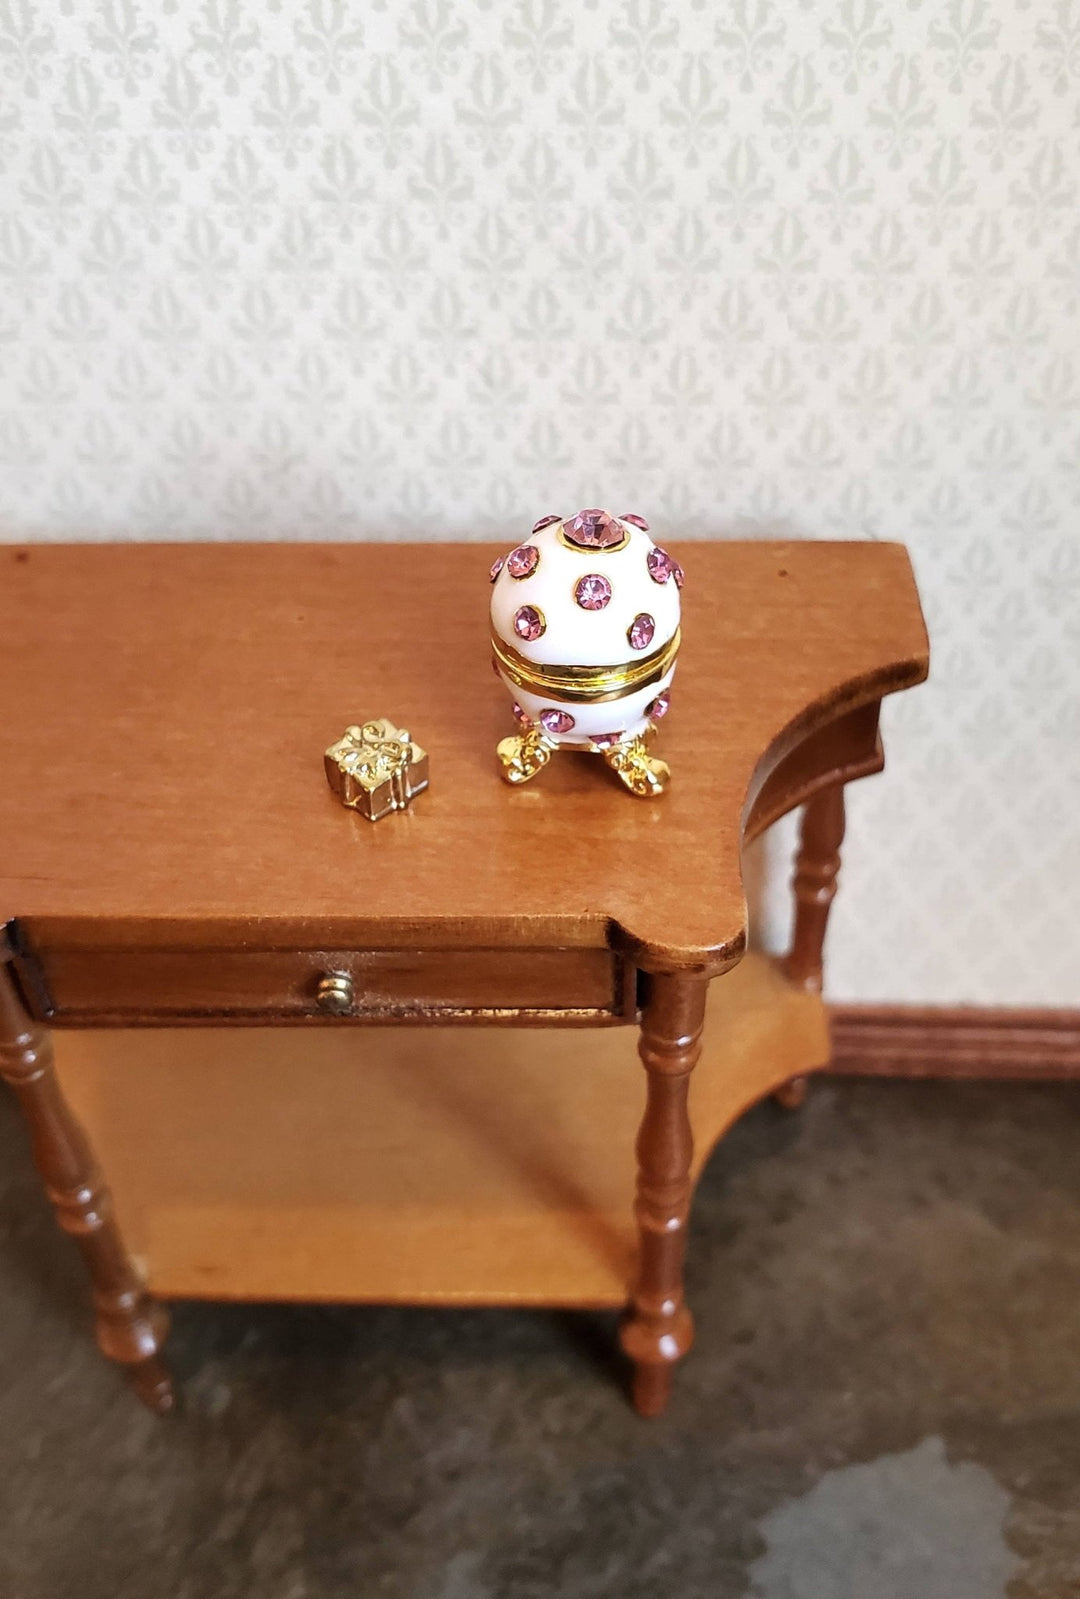 Dollhouse Miniature Jeweled Imperial Egg Opens with Gold Gift Inside 1:12 Scale - Miniature Crush